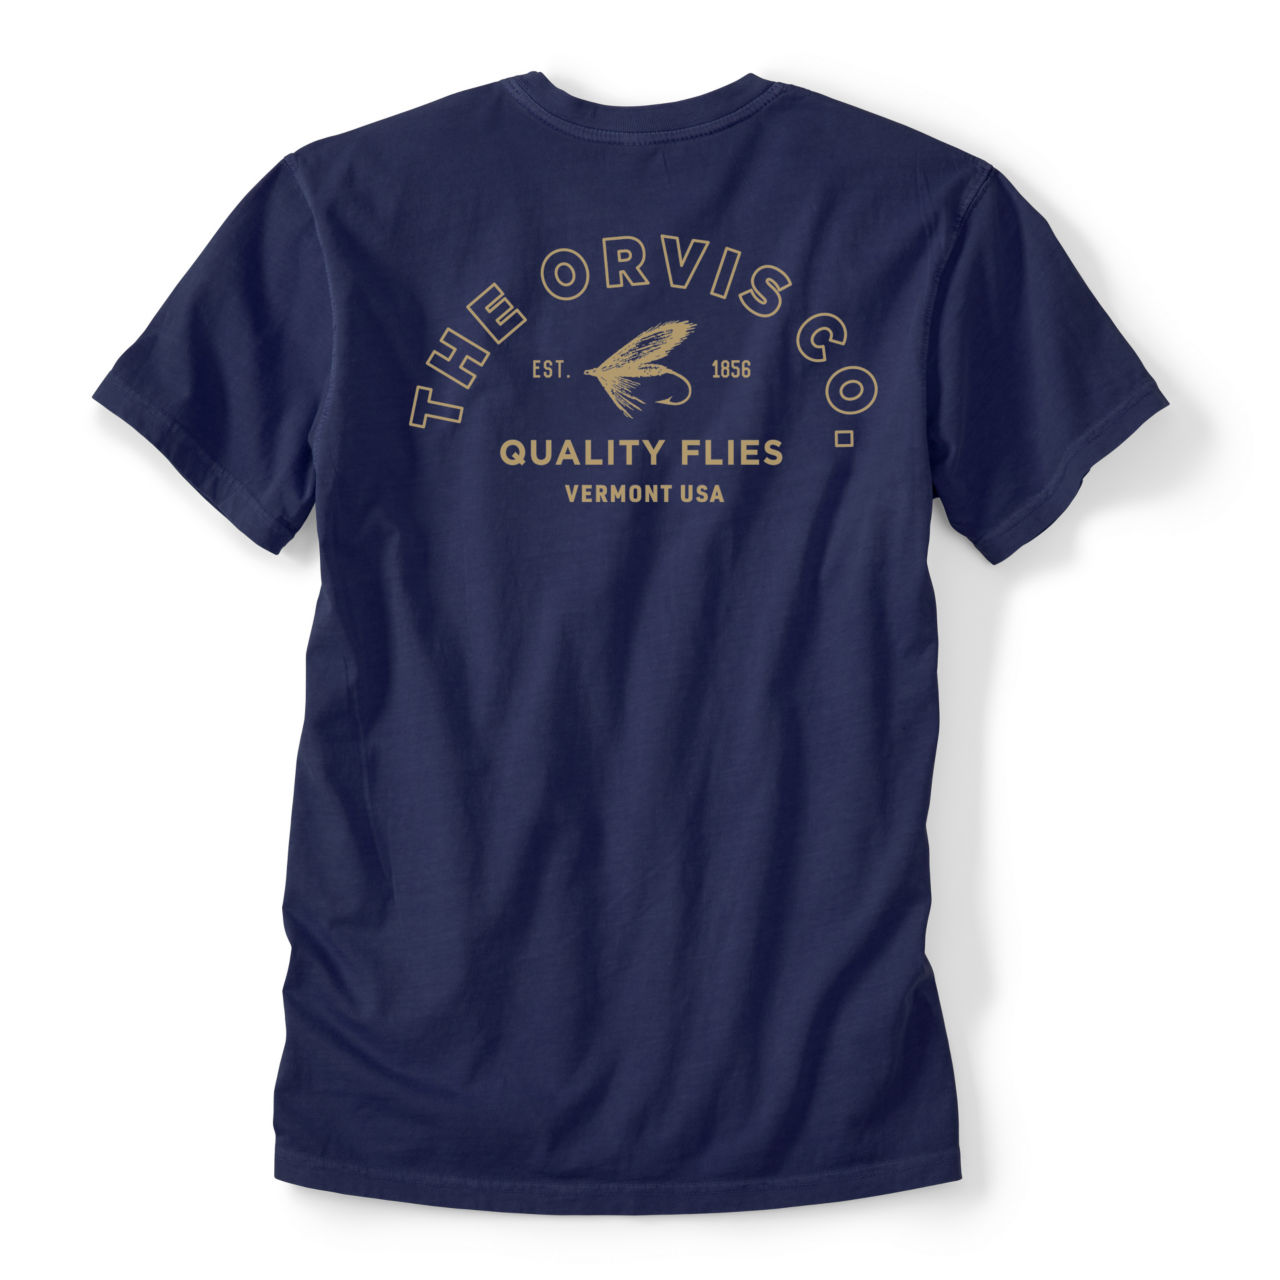 Quality Flies T-Shirt - NAVY image number 0